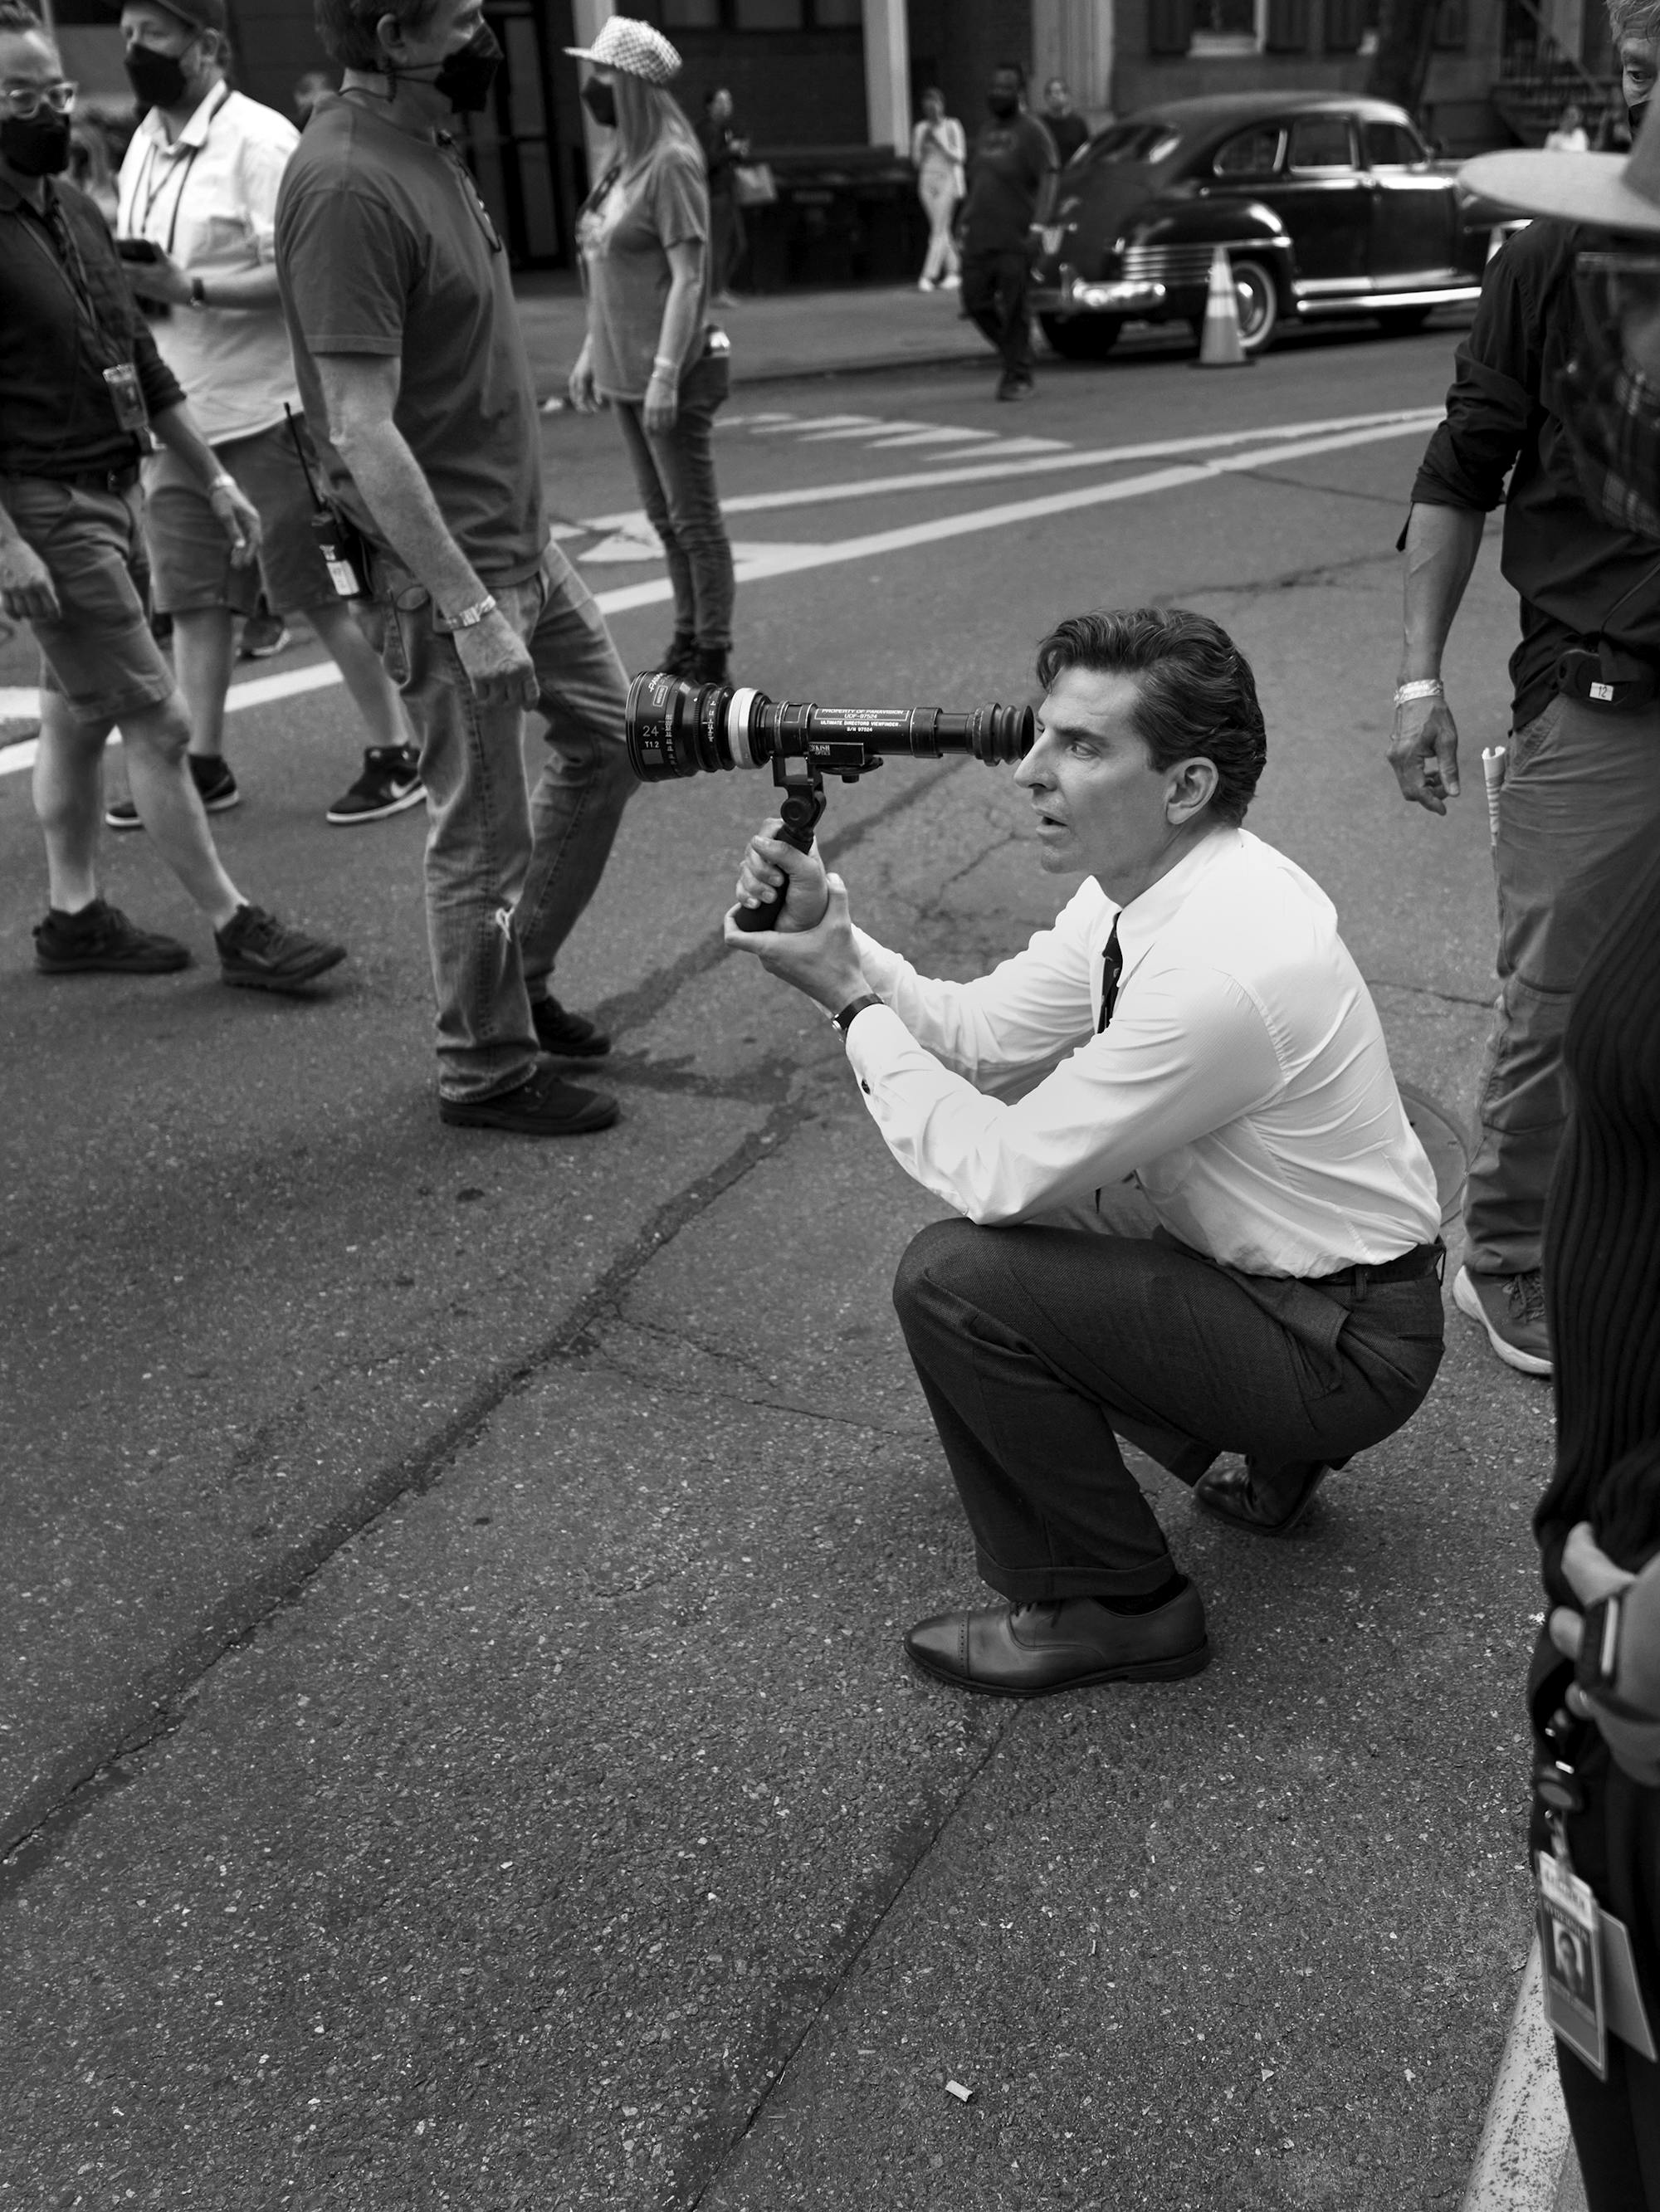 Bradley Cooper, in full costume, kneels on the street and looks into a lens.